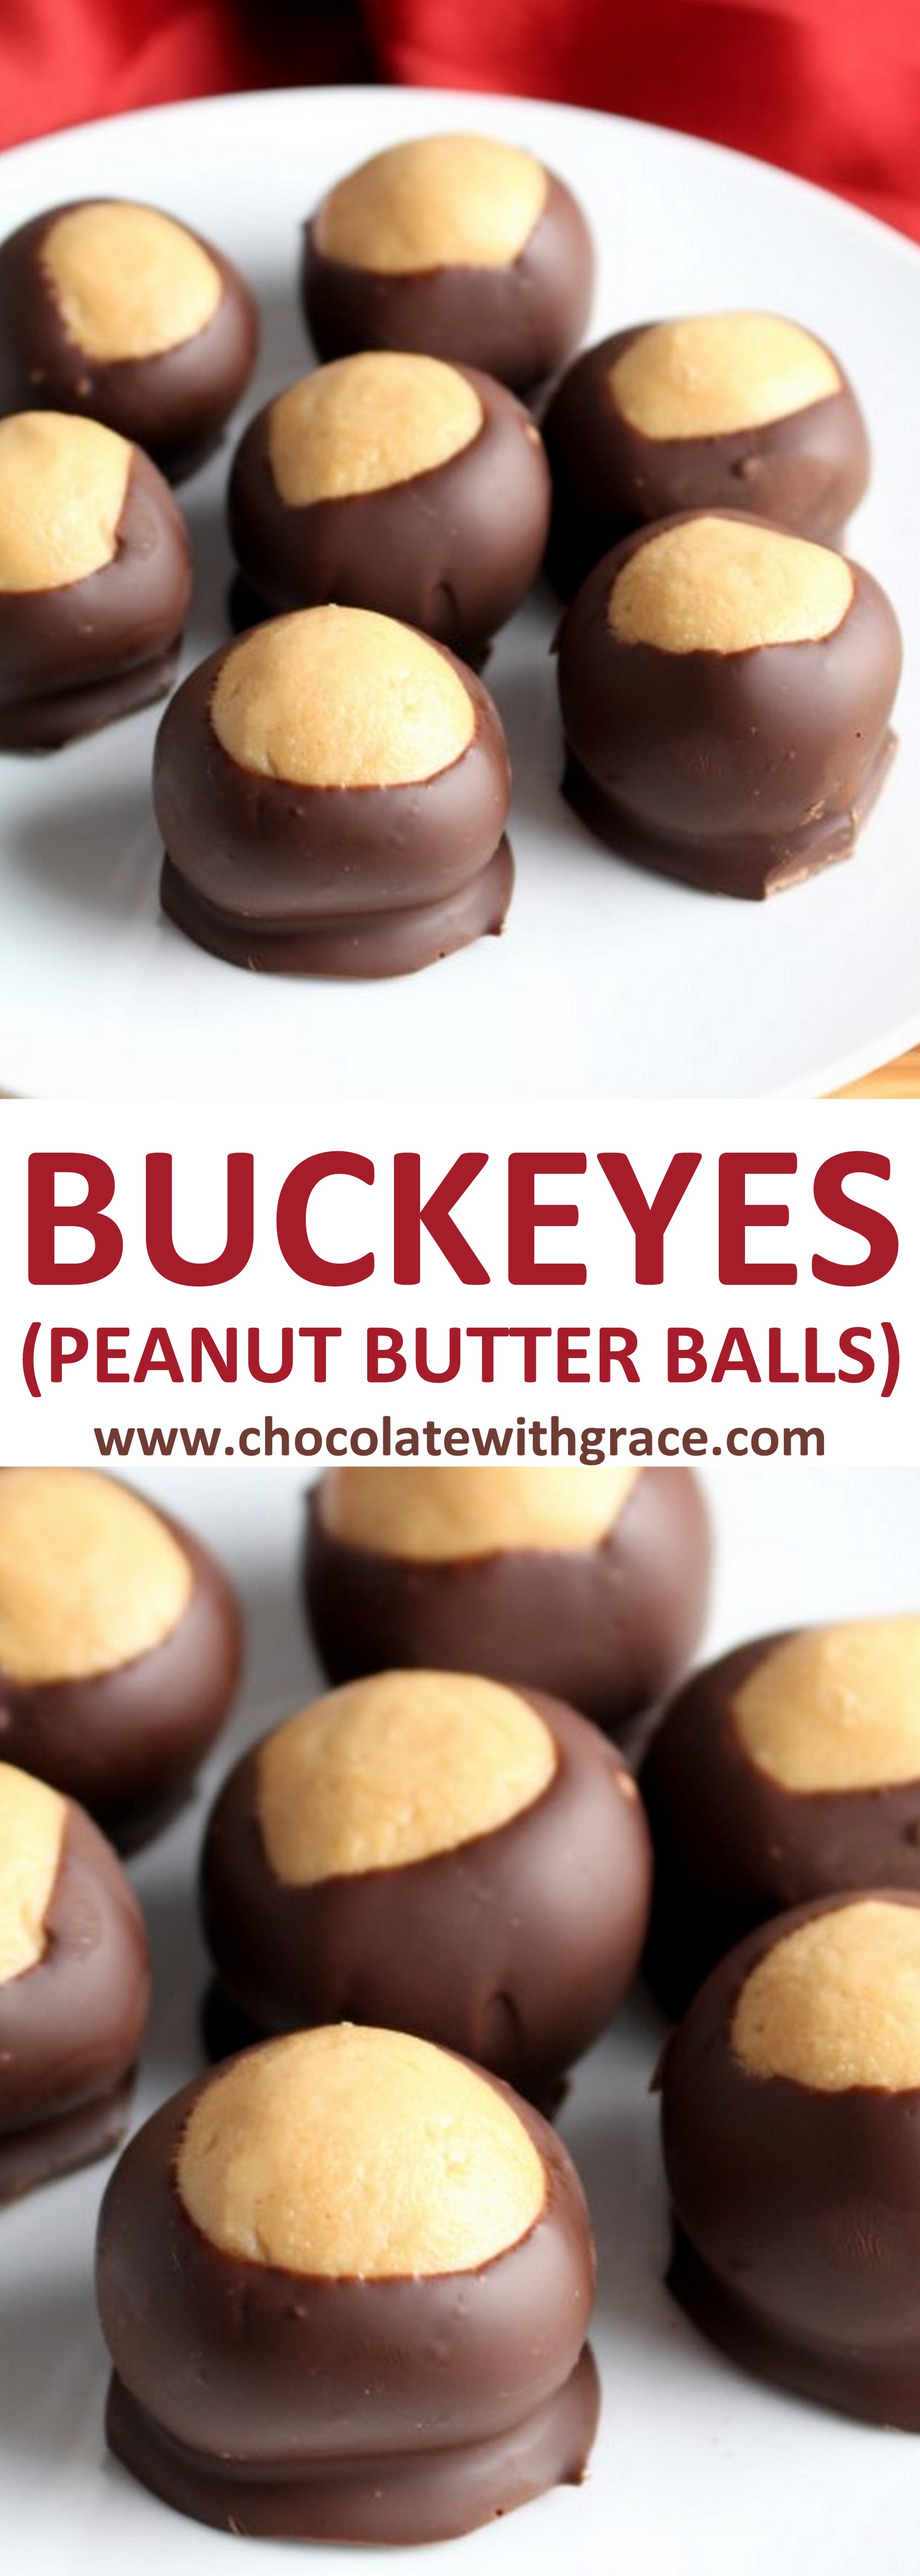 Buckeyes Peanut Butter Balls Chocolate With Grace